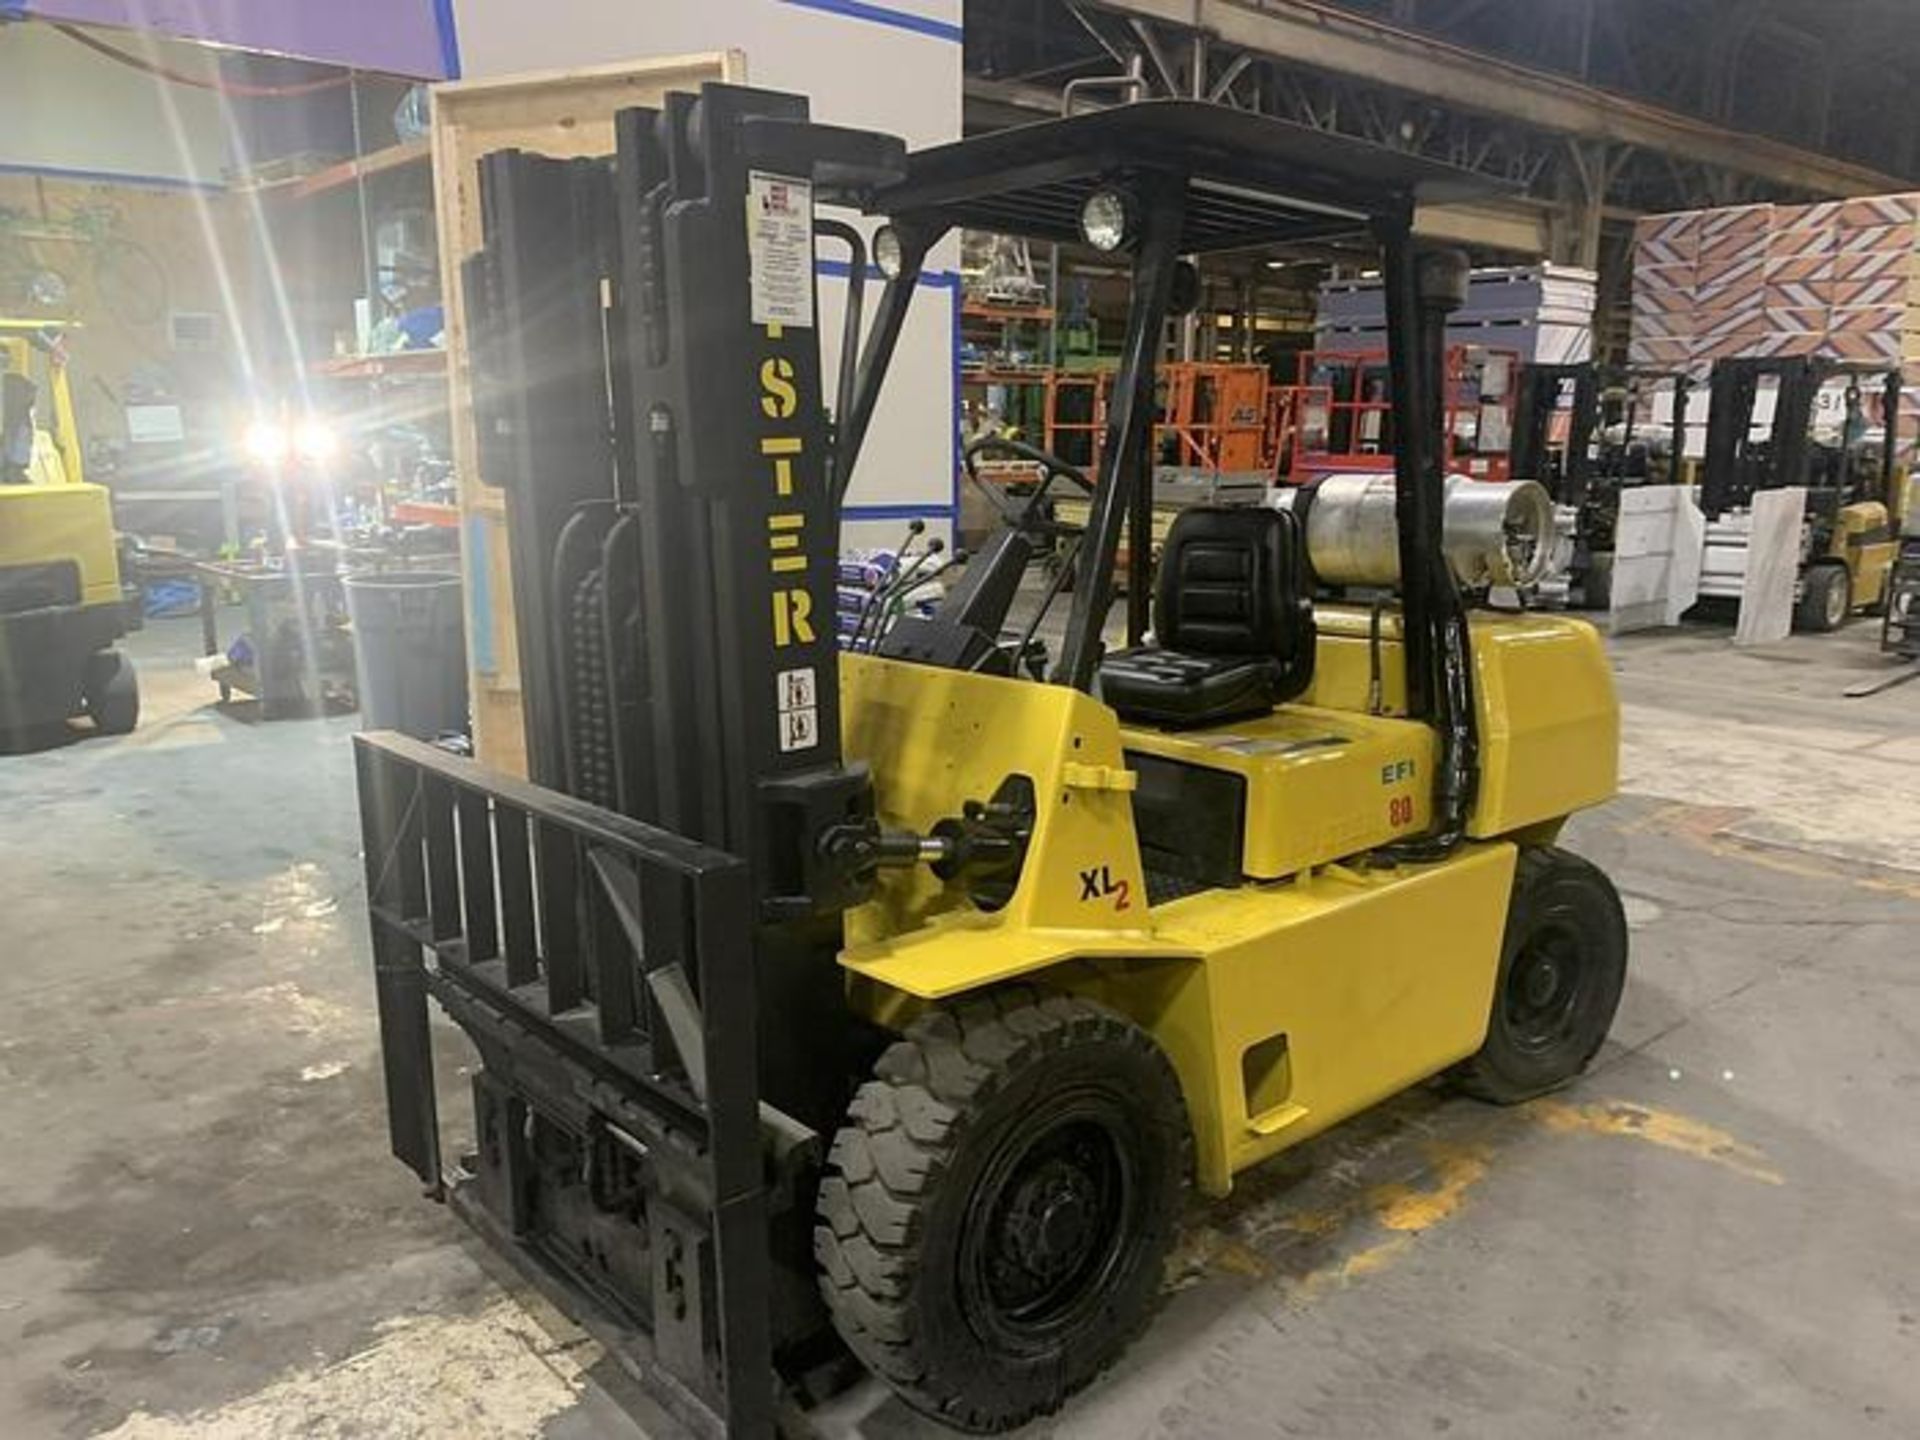 HYSTER H80XL 8,000 POUND FORKLIFT WITH SIDESHIFT - PNEUMATIC TIRE TRIPLE STAGE